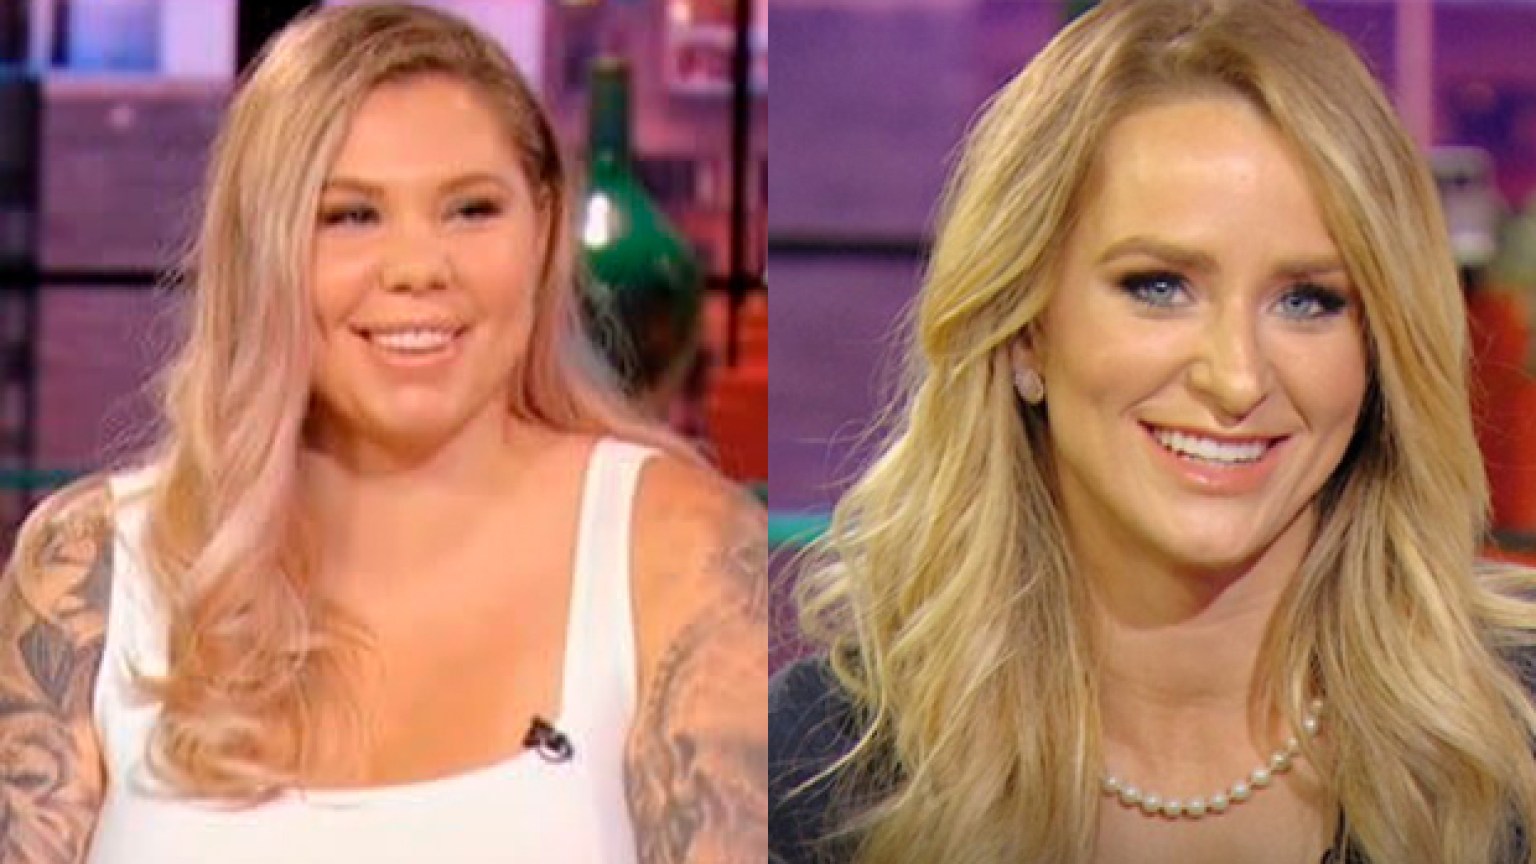 Kailyn Lowry And Leah Messer Face Off With Costa Rica Bikini Pics Hollywood Life